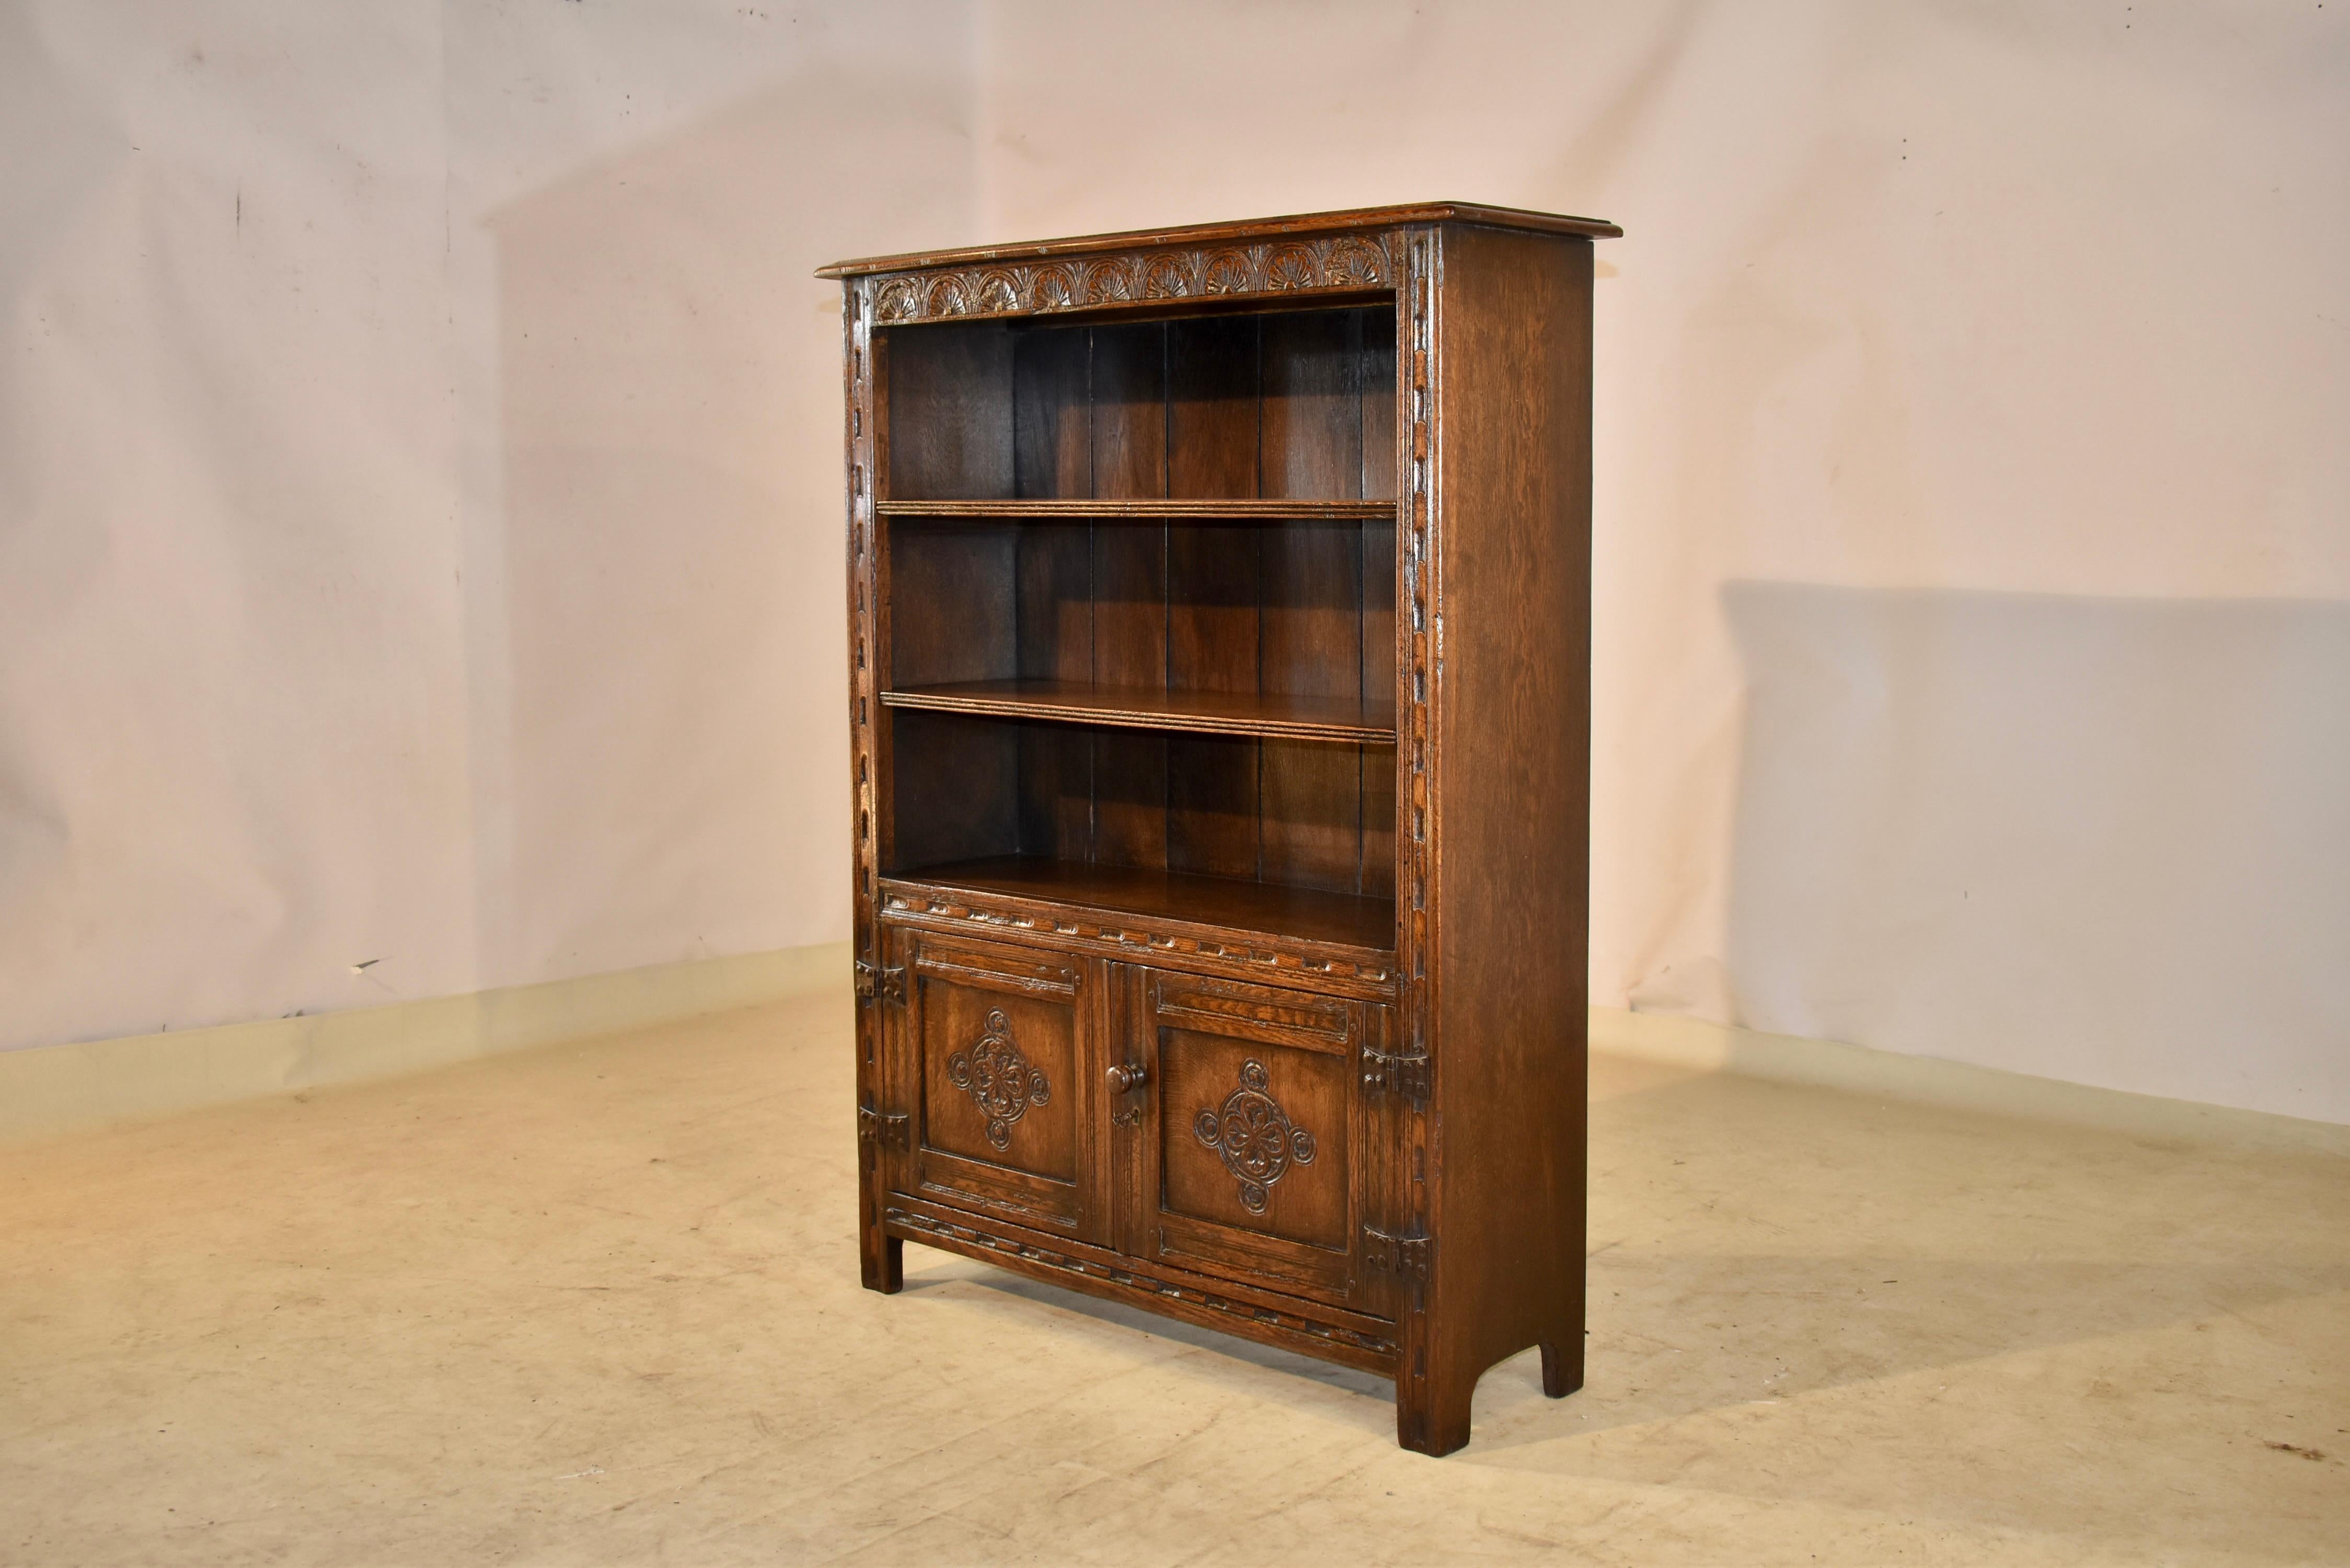 C. 1900 English Oak Bookcase In Good Condition For Sale In High Point, NC